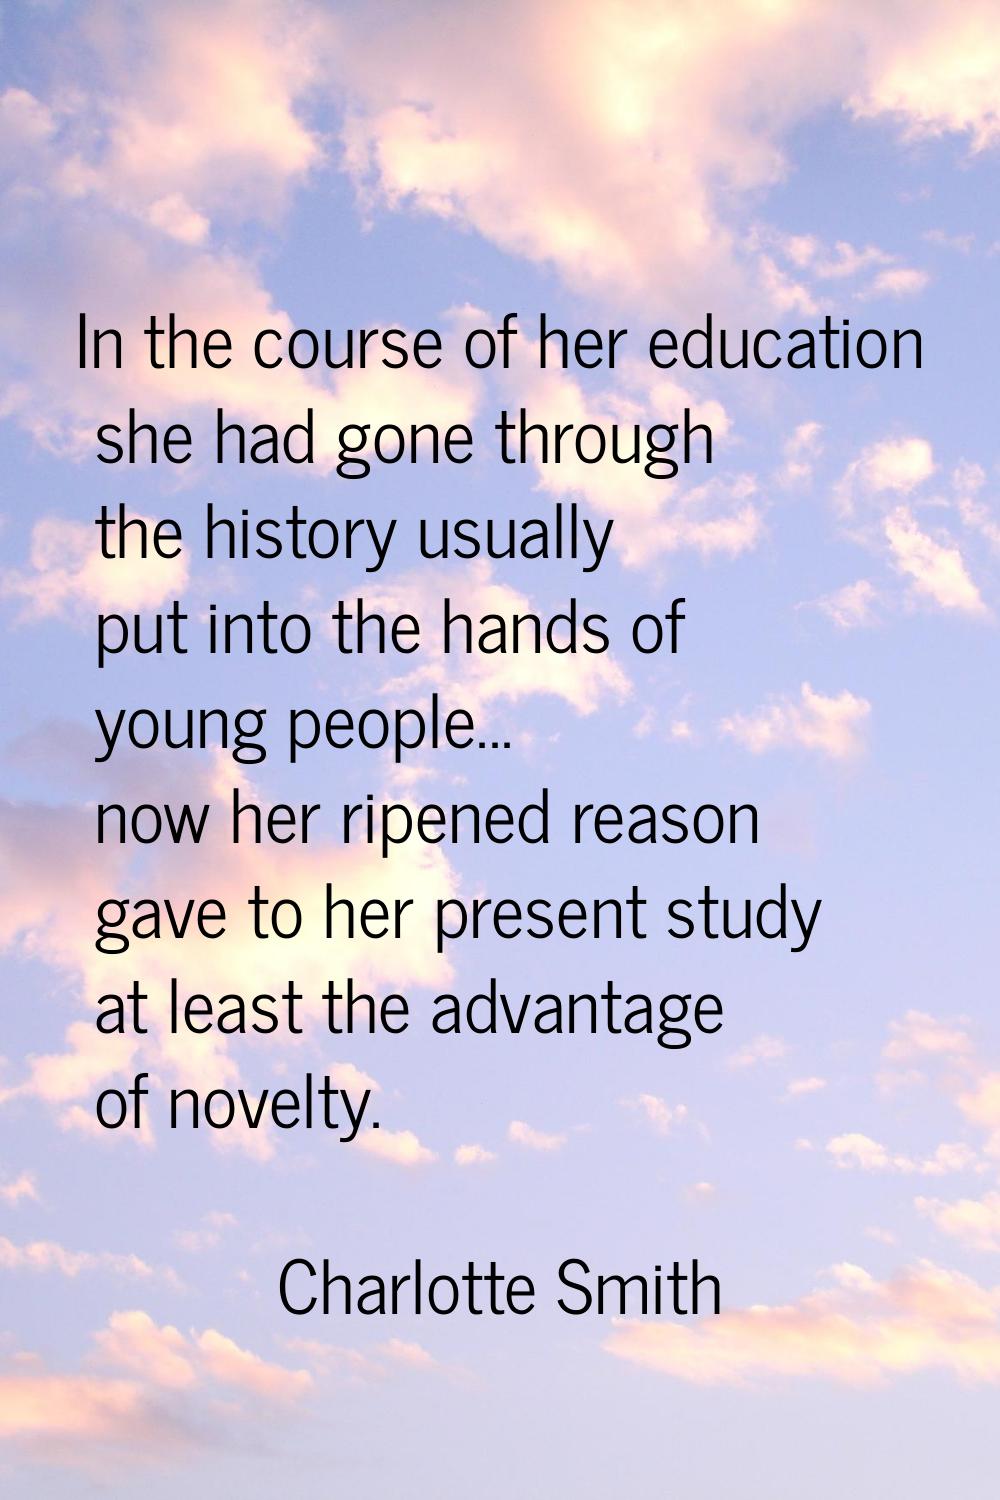 In the course of her education she had gone through the history usually put into the hands of young